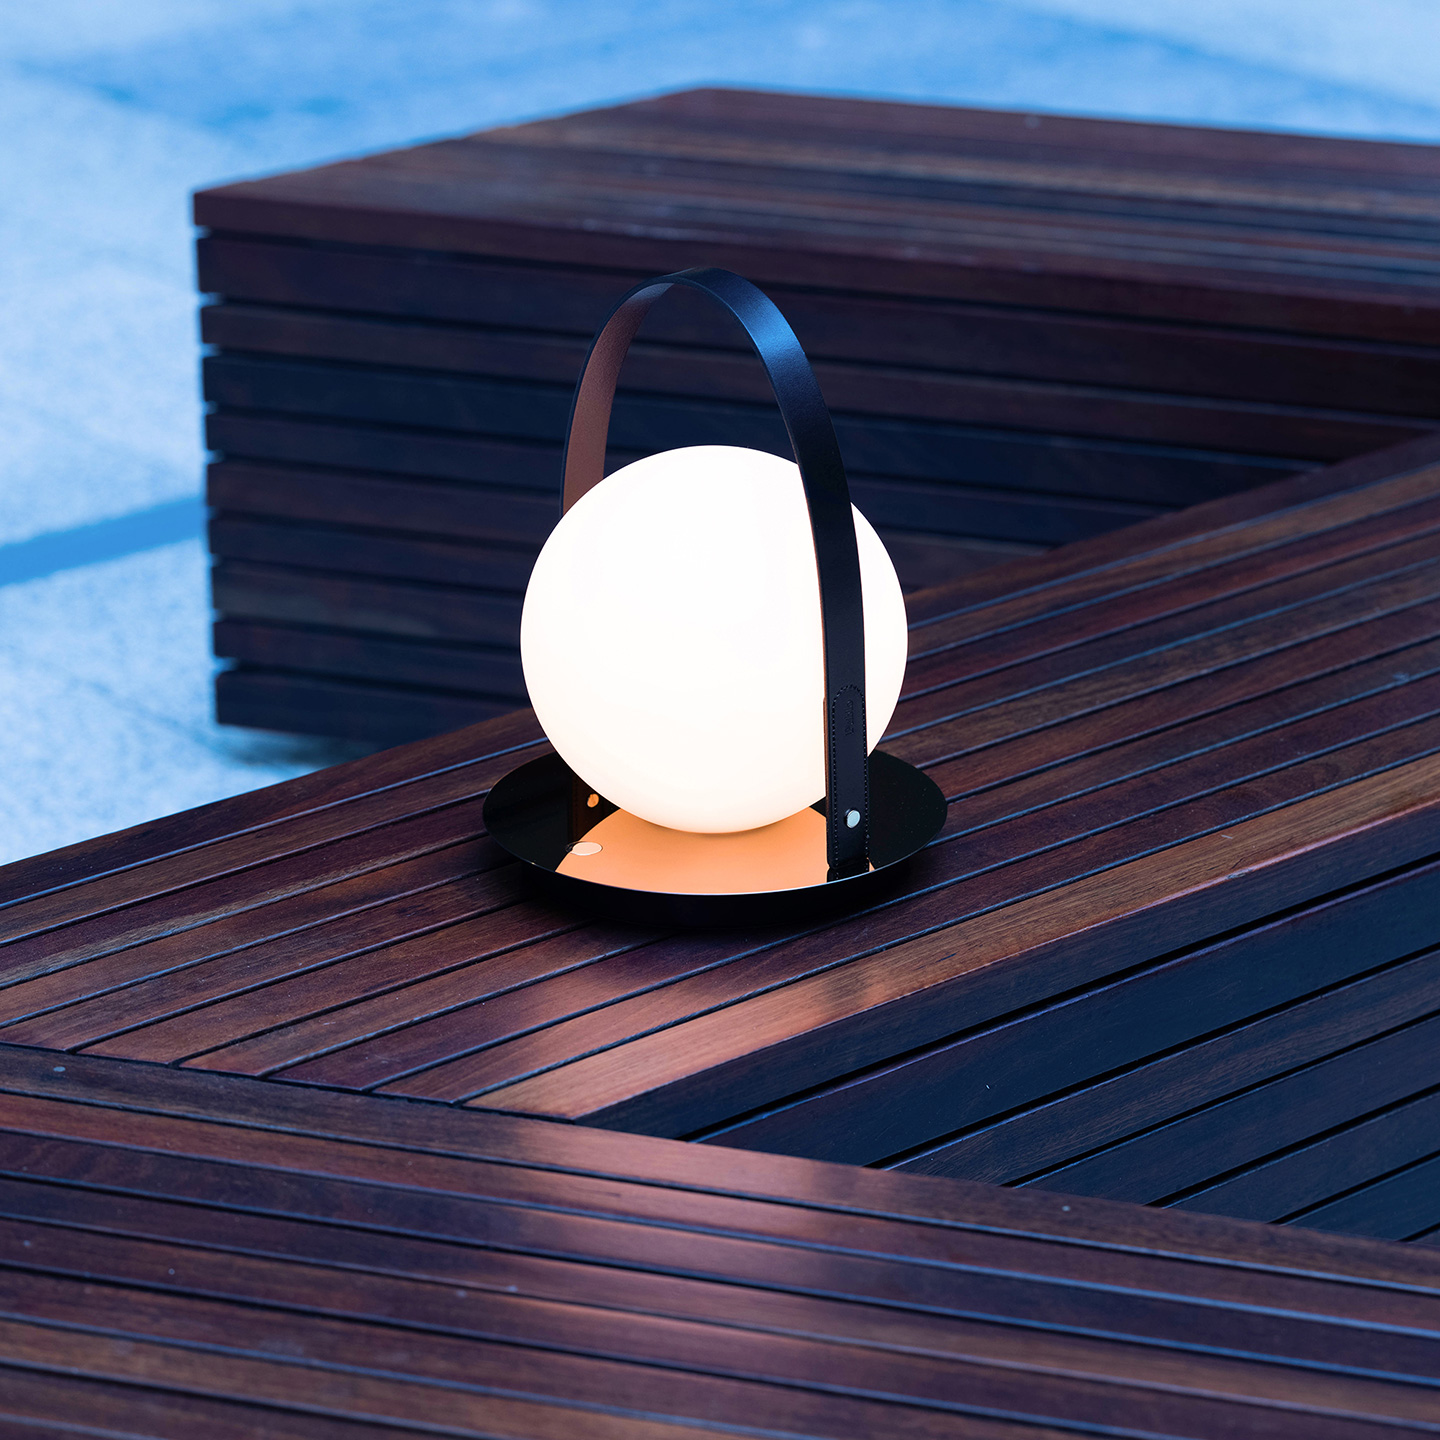 Bola Lantern's elegant scale with wide-ranging finish combos makes it a perfect centerpiece to gather around.